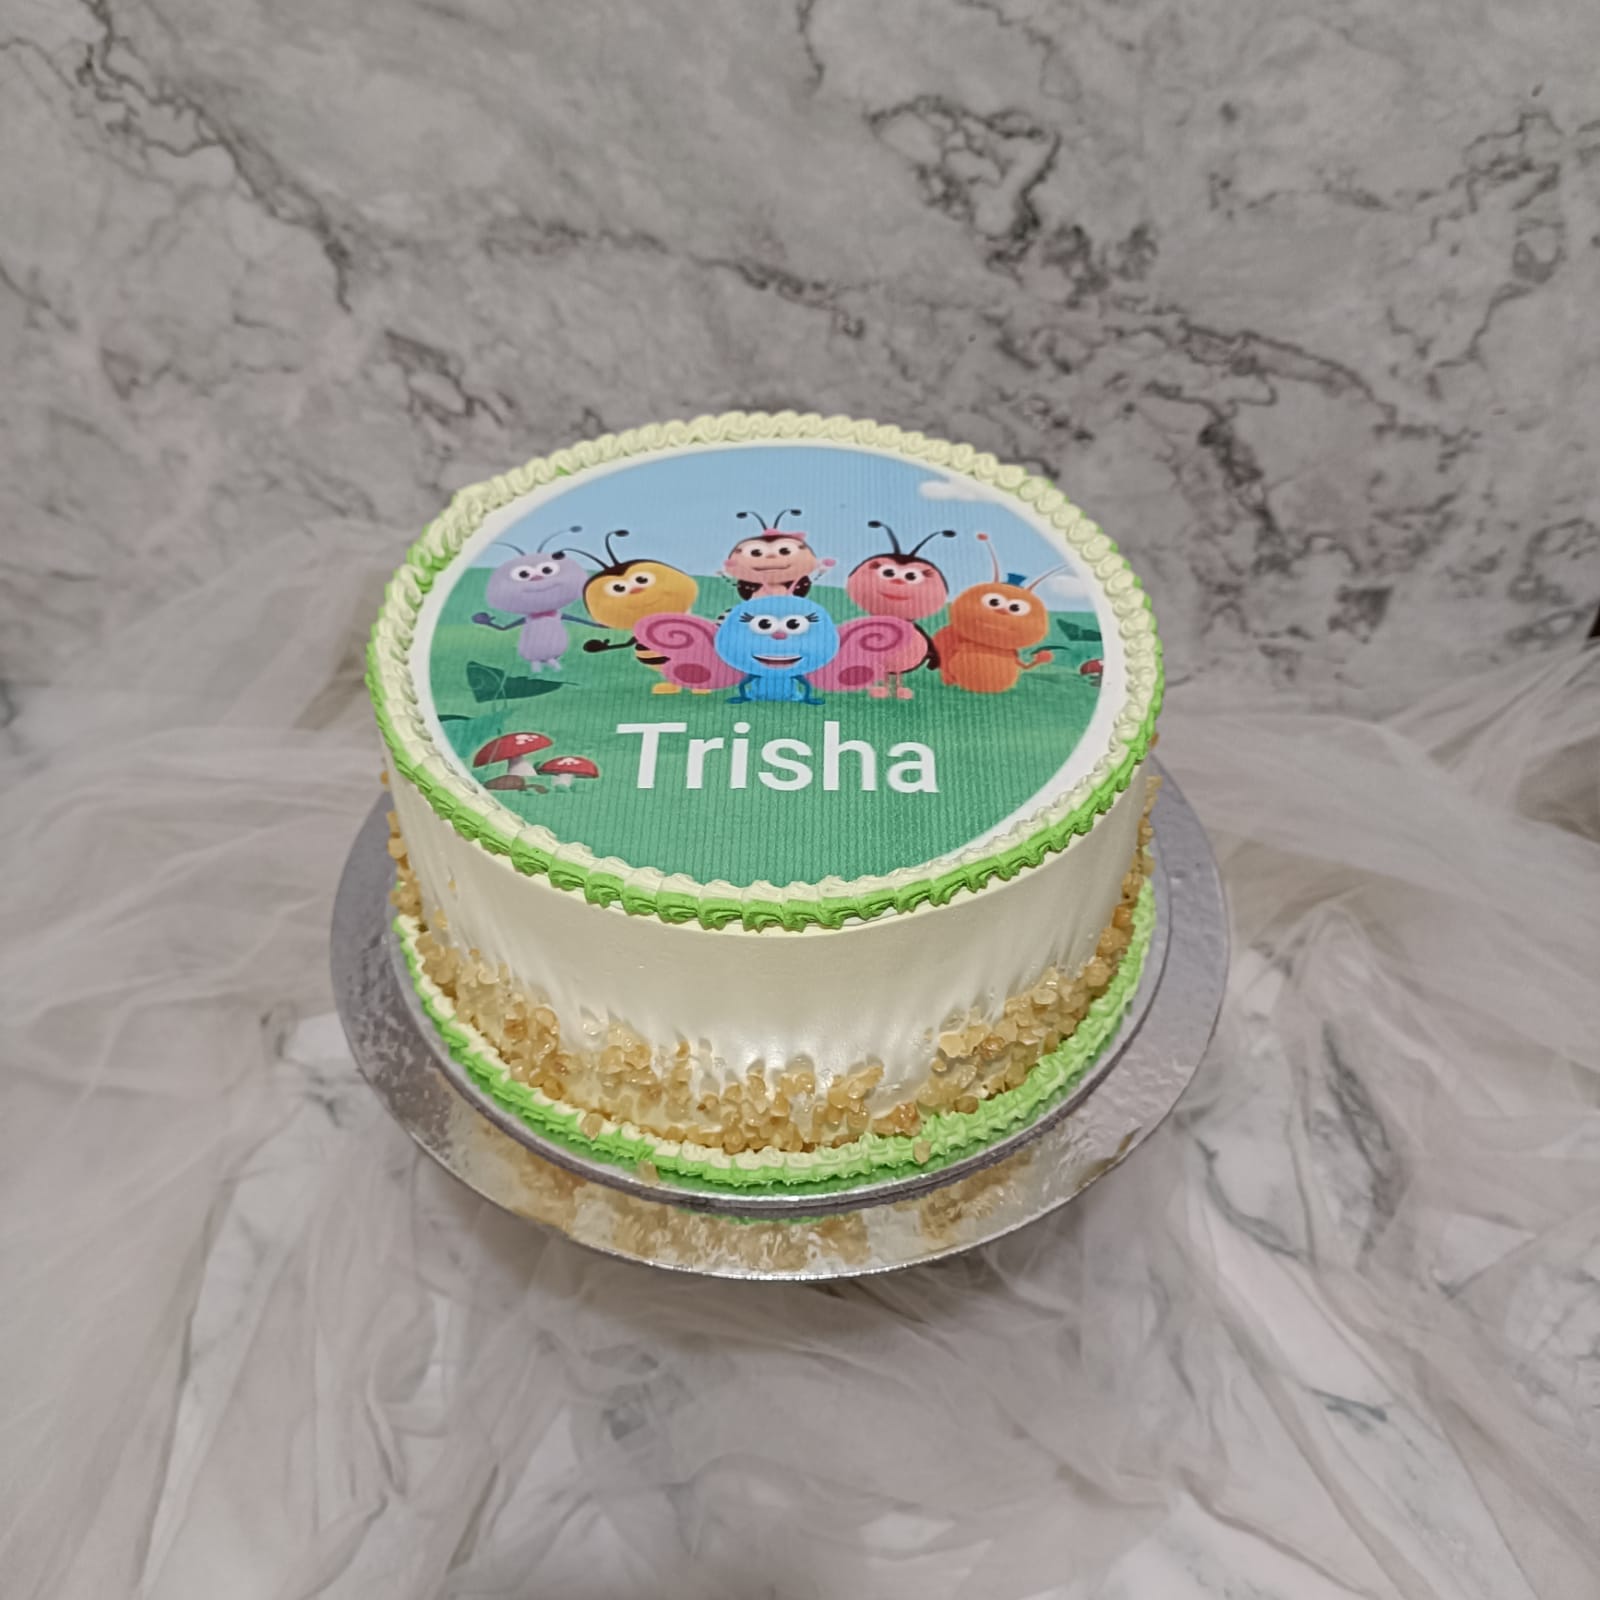 Write Name On Birthday Cake Pic Wrapped By Ribbon